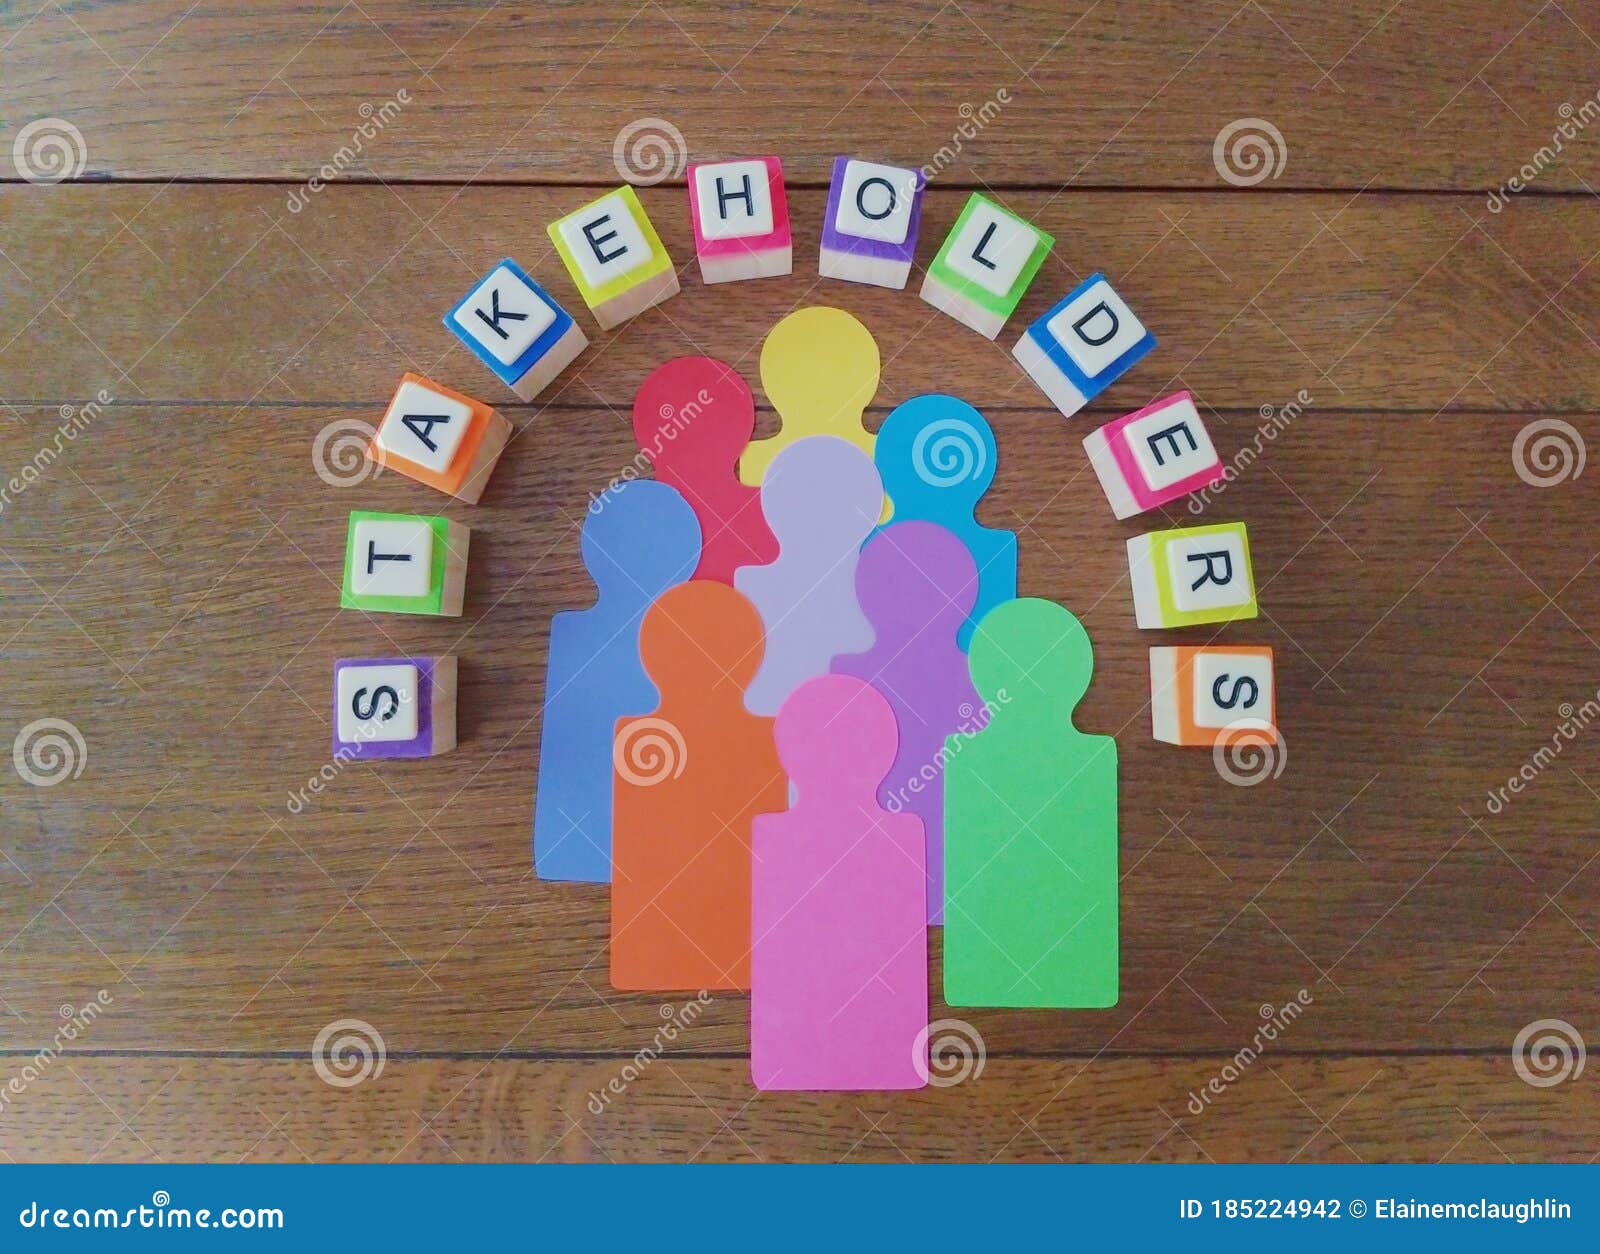 stakeholders concept with multiple representatives and colorful text on wood background.